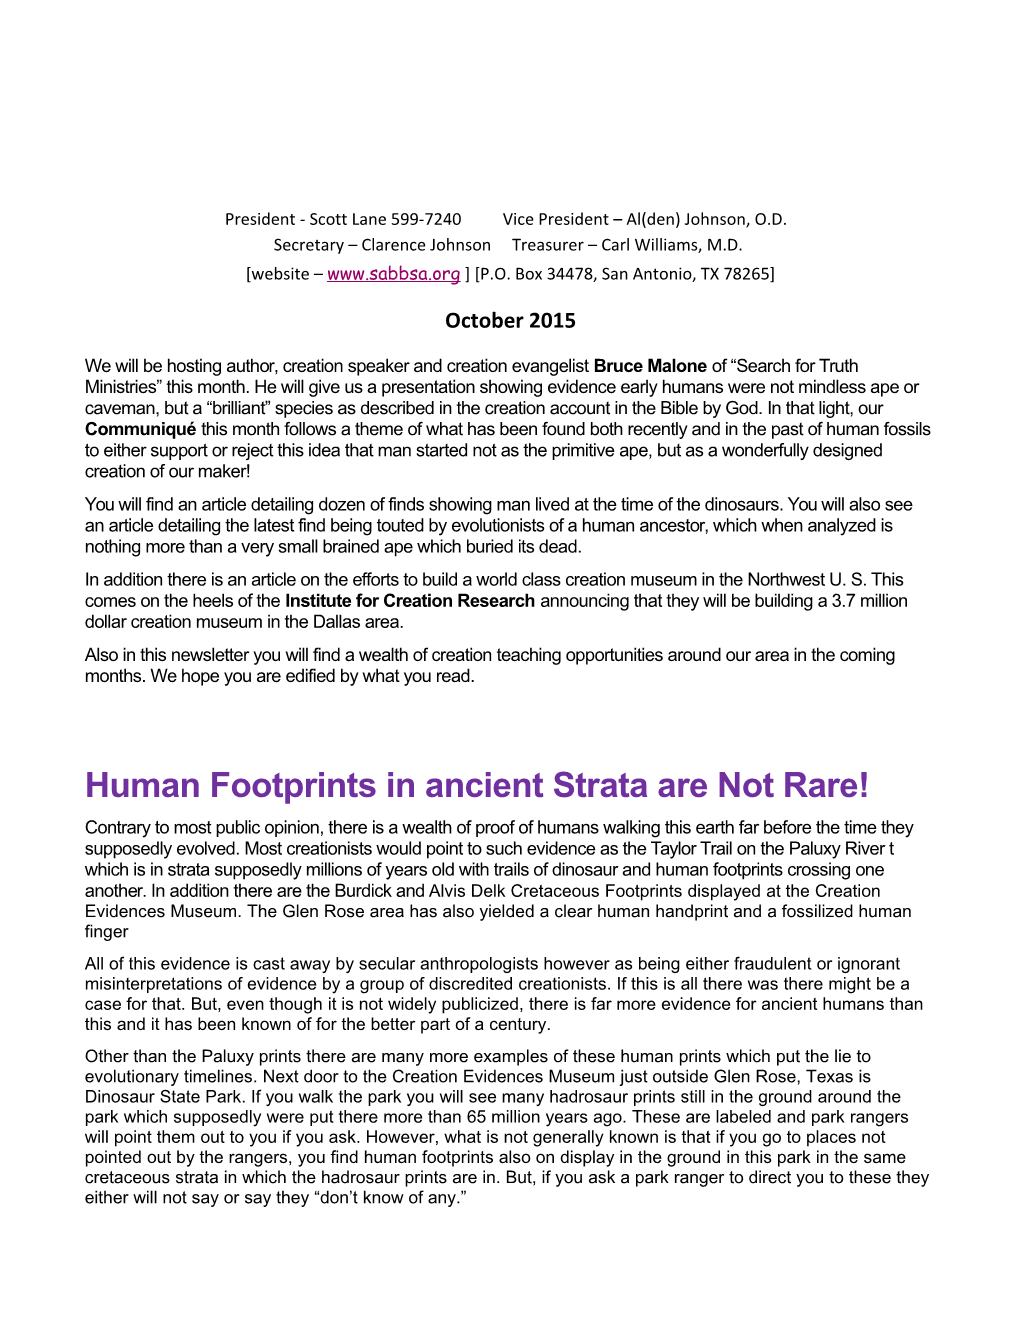 Human Footprints in Ancient Strata Are Not Rare!